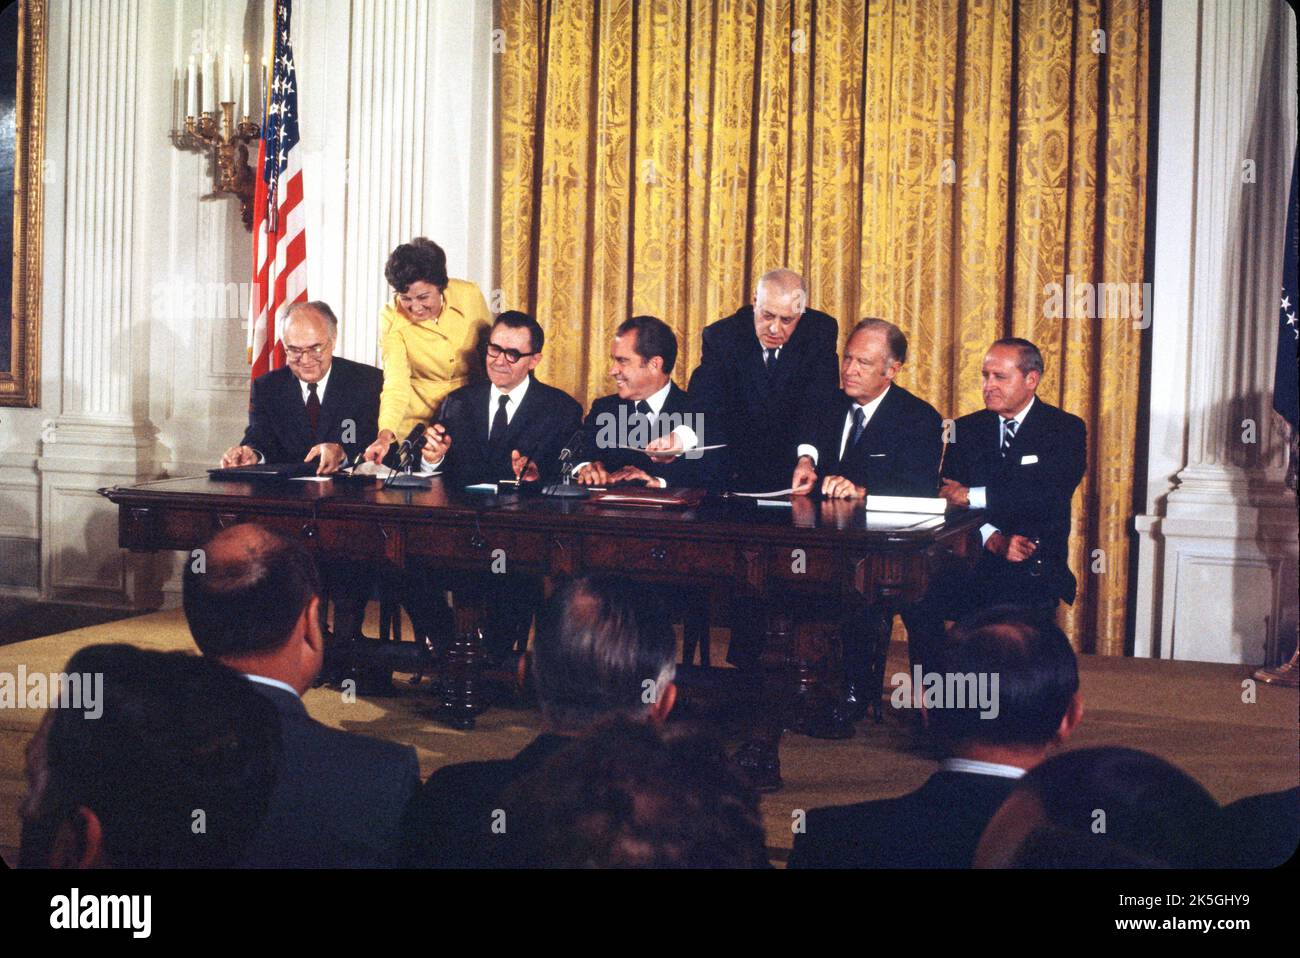 United States President Richard M. Nixon, center, looks on during a signing ceremony for the instruments of ratification of the SALT agreements between the Union of Soviet Socialist Republics (USSR) and the United States in the East Room of the White House in Washington, DC on October 3, 1972. Pictured from left to right: Soviet Ambassador Anatoly F. Dobrynin, Soviet Foreign Minister Andrei Gromyko, President Nixon, US Secretary of State William P. Rogers and US SALT negotiator Gerard C. Smith. The agreements intend to restrain the growth of the nuclear arsenals of both nations. Credit: Arnie Stock Photo